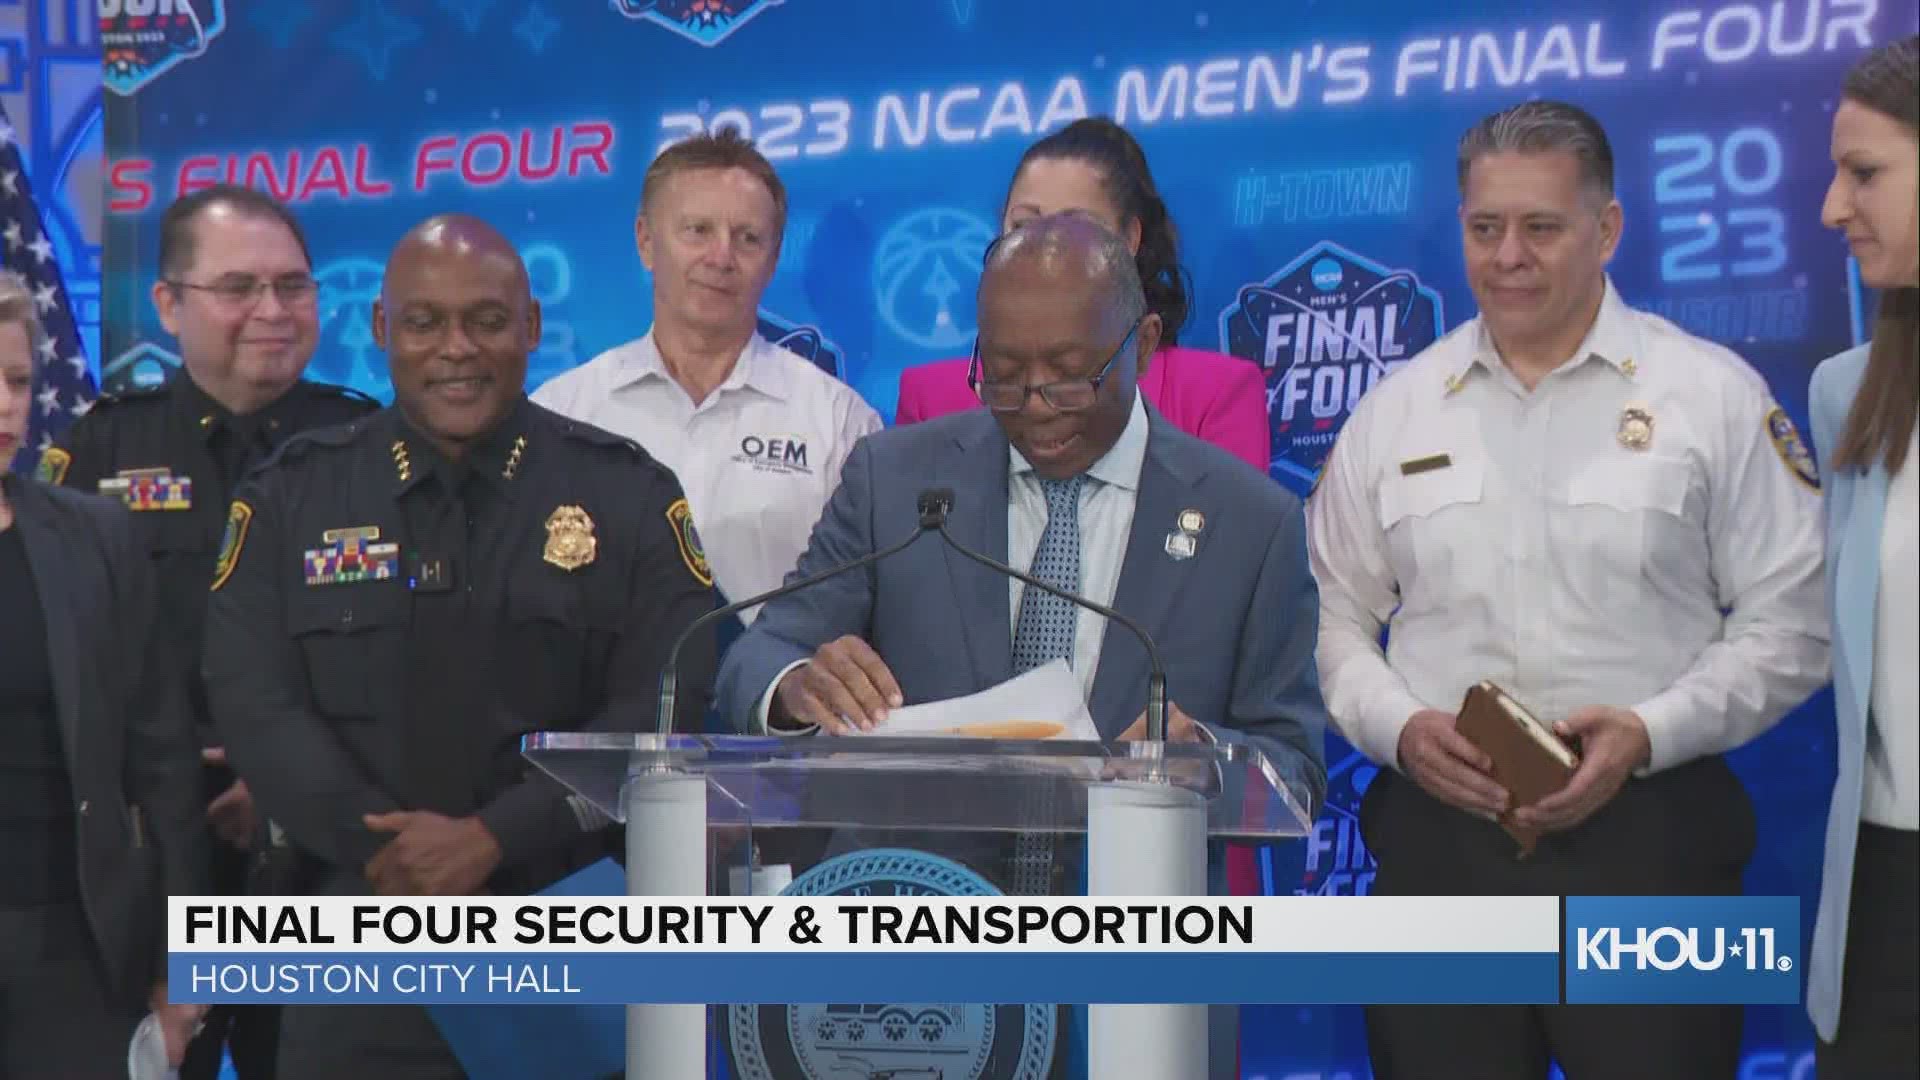 Houston Mayor Sylvester Turner, Chief Troy Finner and Fire Chief Sam Pena detailed plans to keep everyone safe during the Final Four.